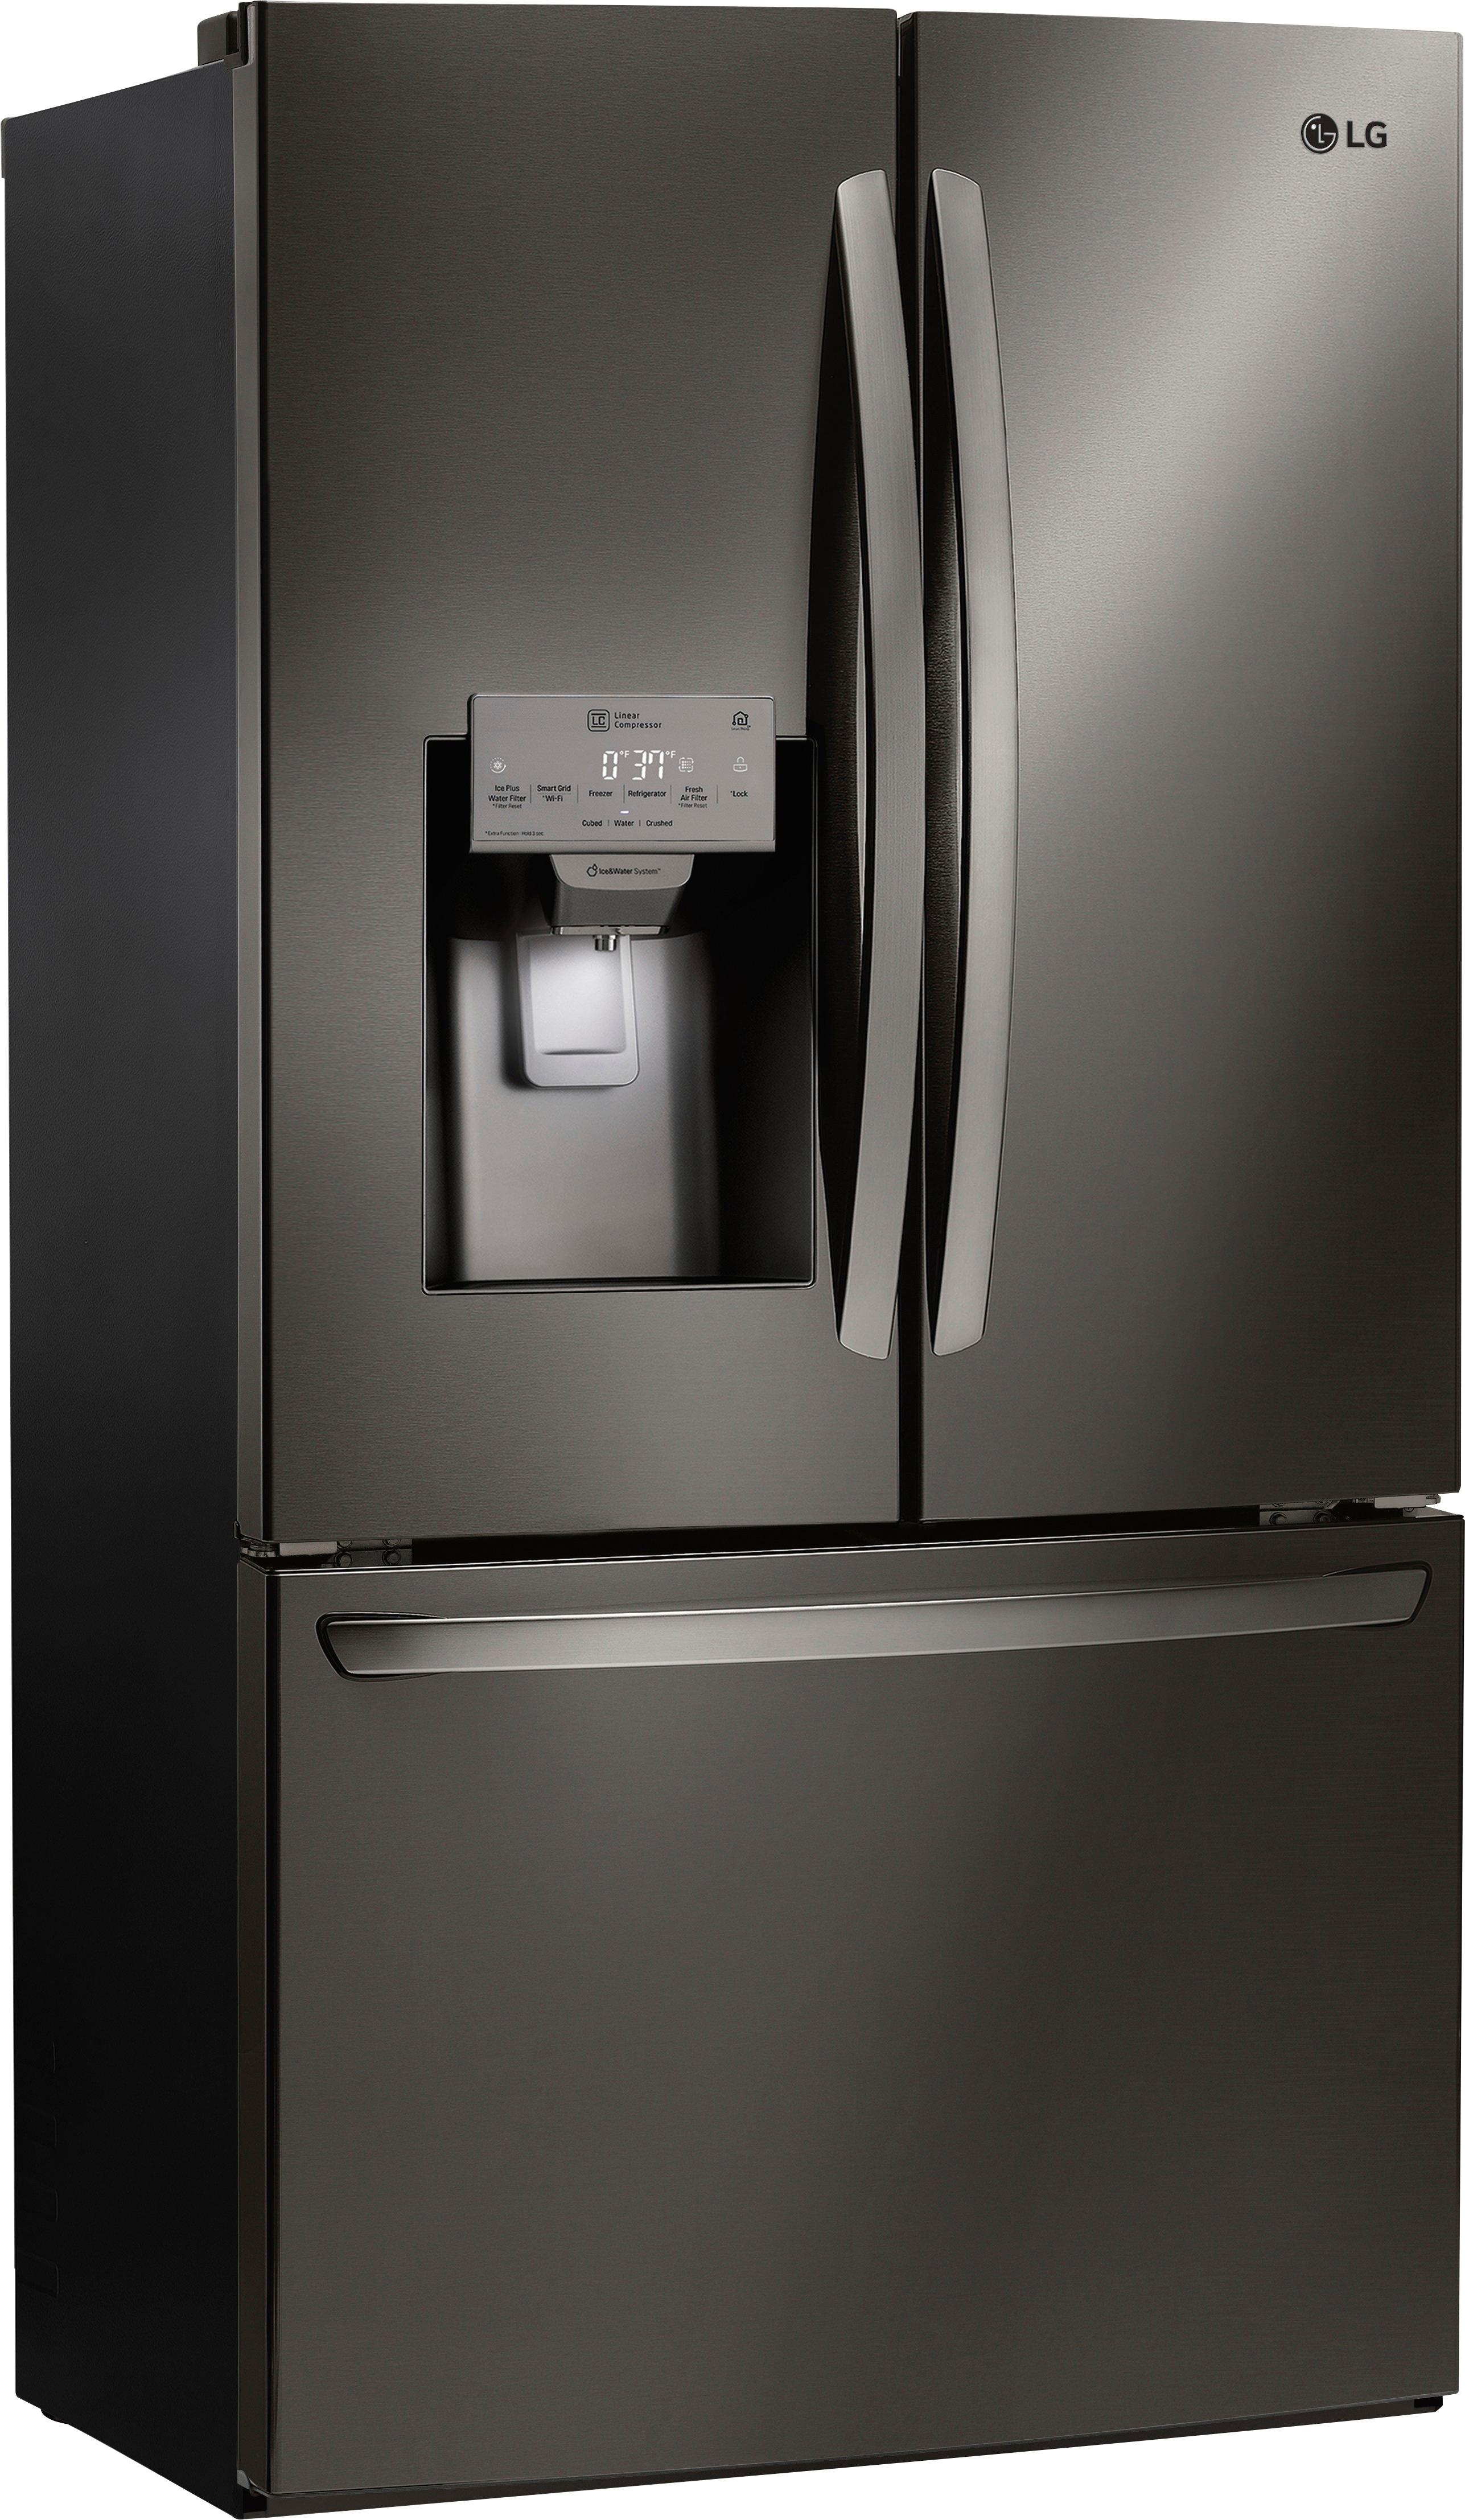 Angle View: LG - 27.9 Cu. Ft. French Door Smart Refrigerator with External Tall Ice and Water Dispenser - Black Stainless Steel